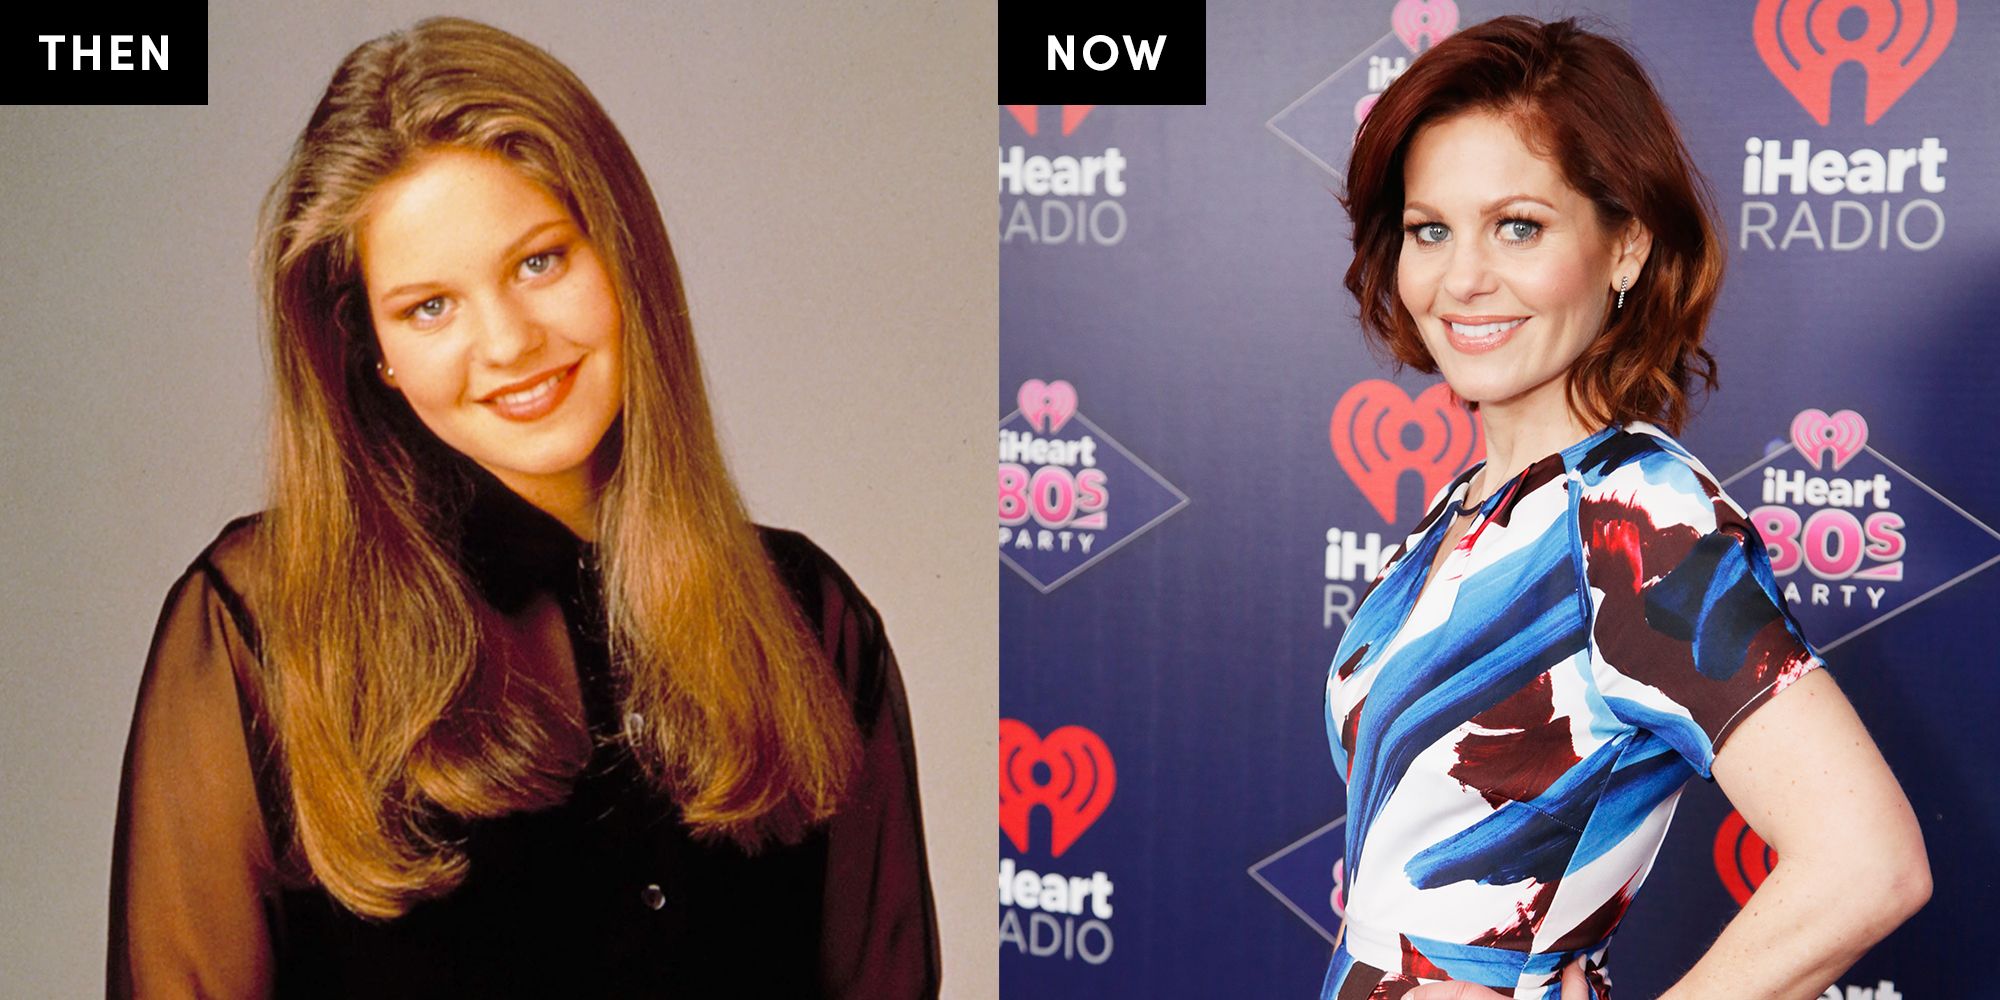 candace cameron then and now